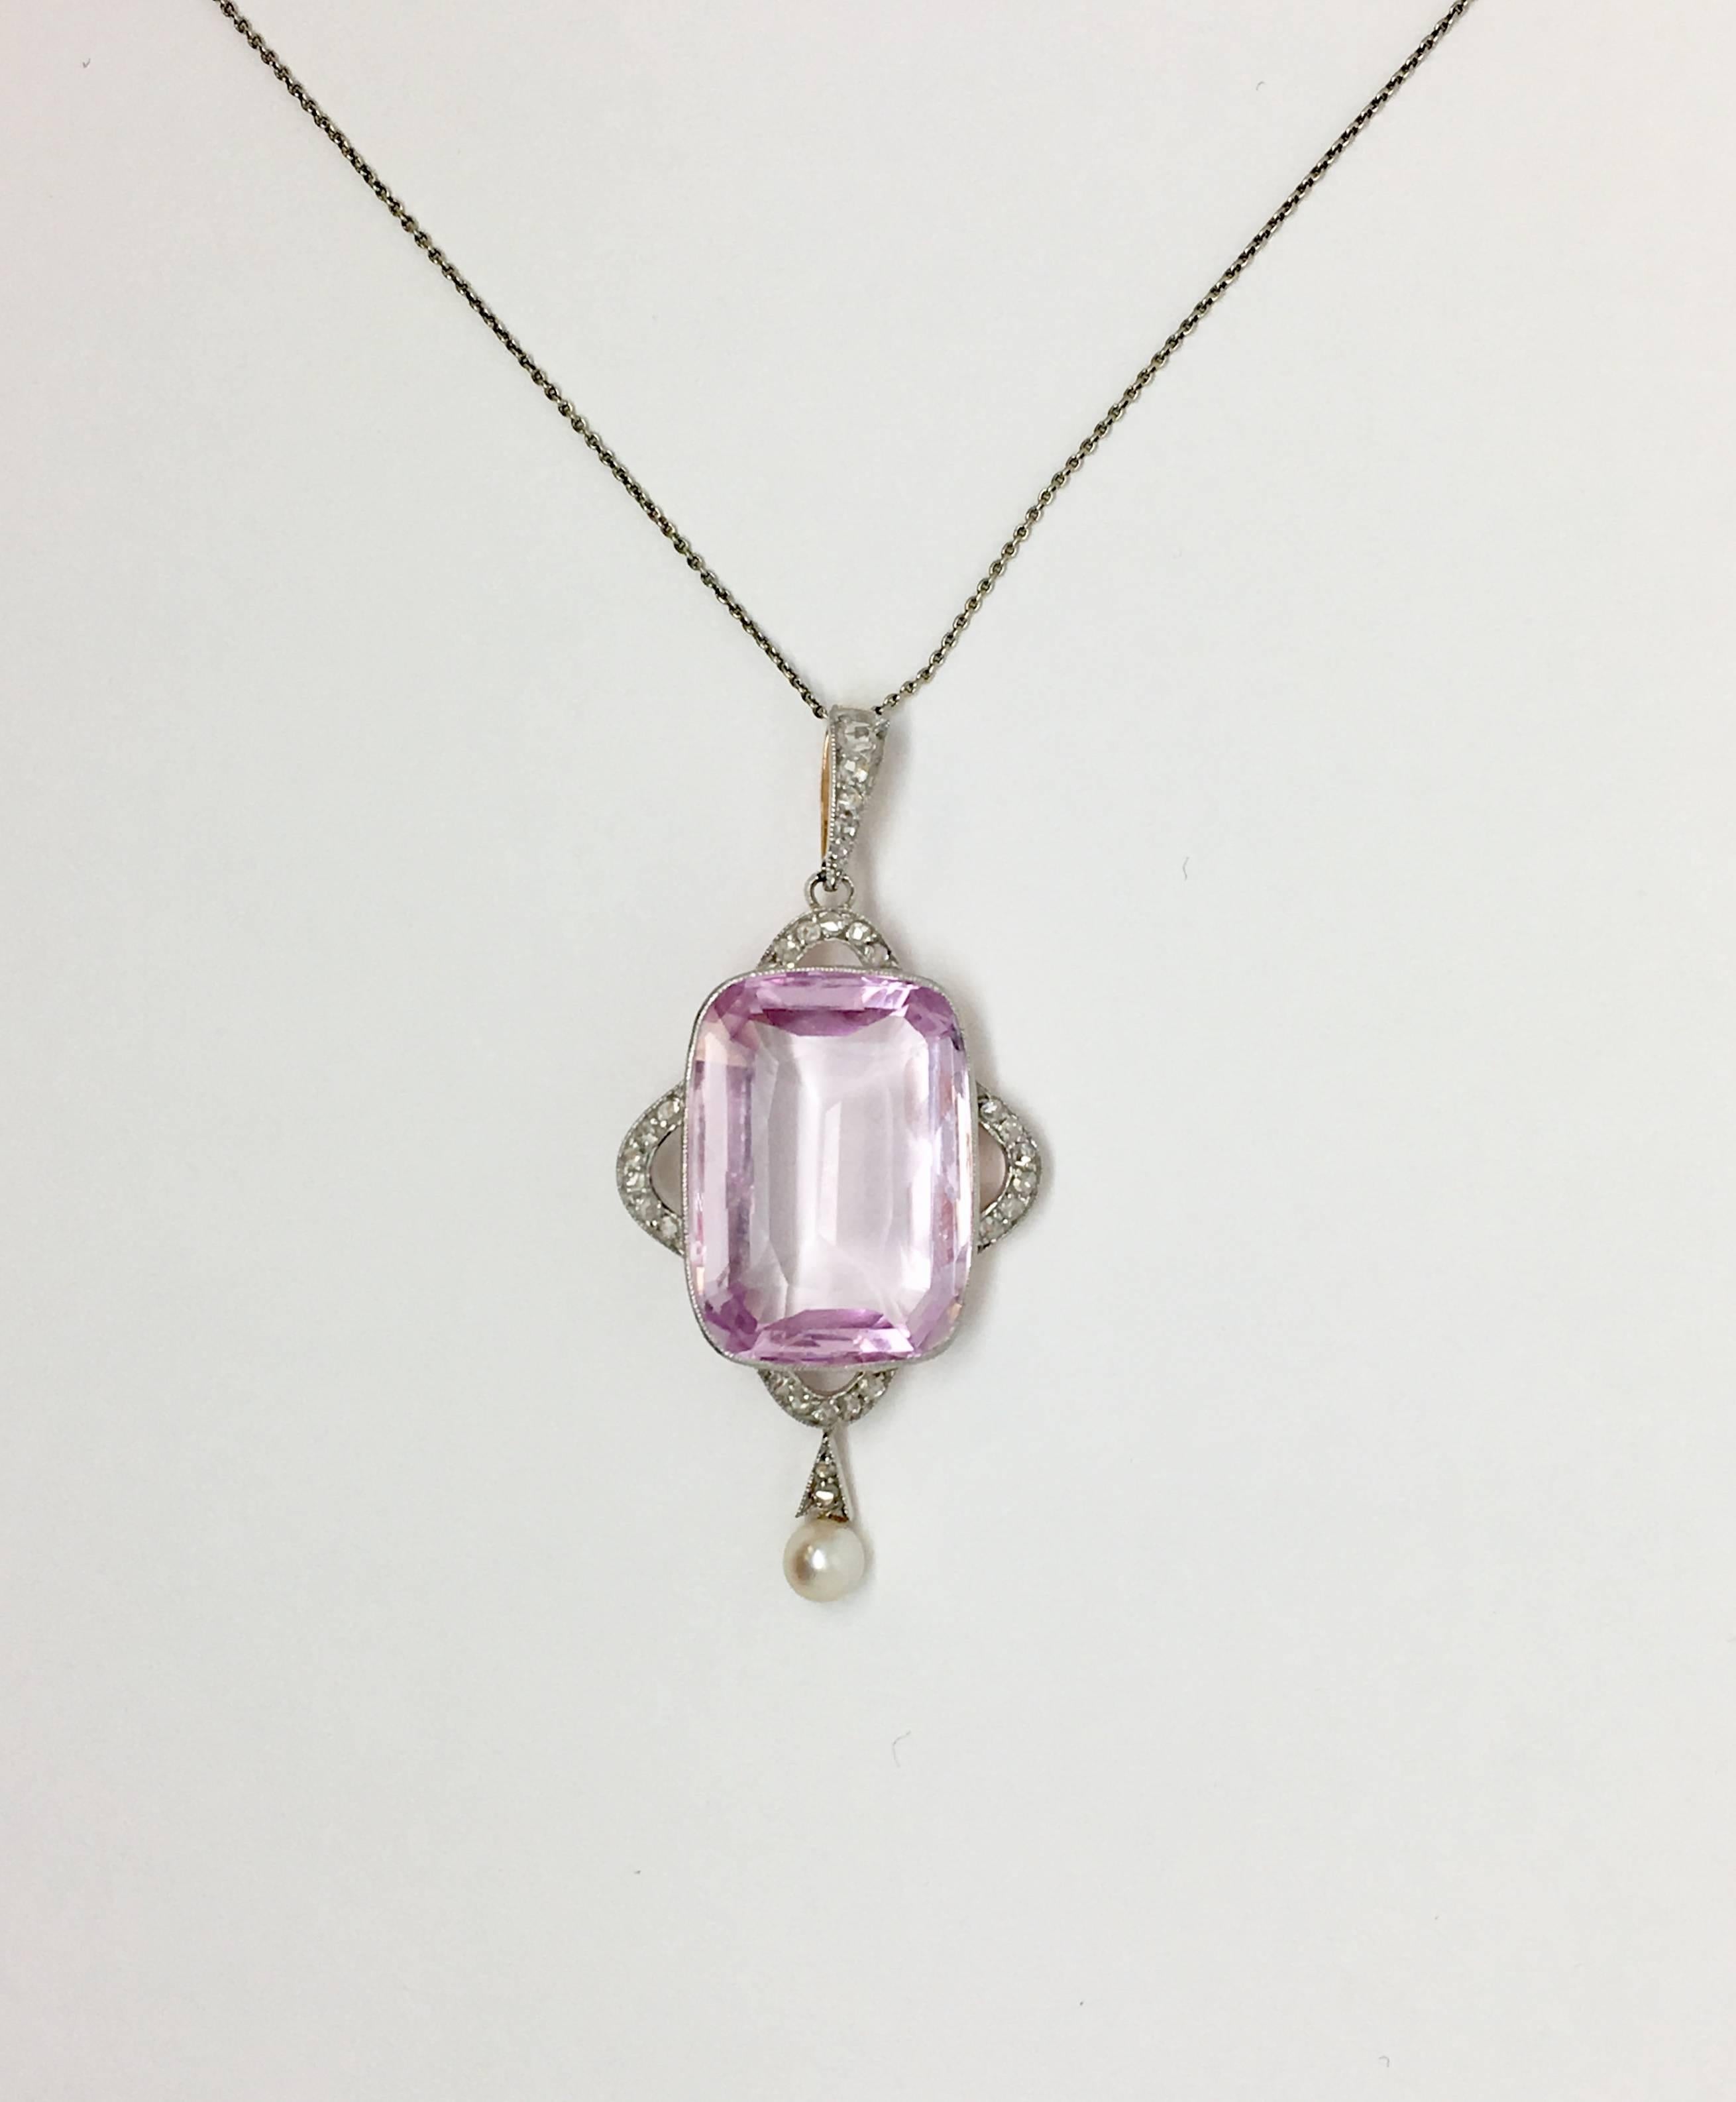 Soft pink rectangular pendant 18 kt and platinum accented with diamonds In Excellent Condition For Sale In Ottawa, Ontario